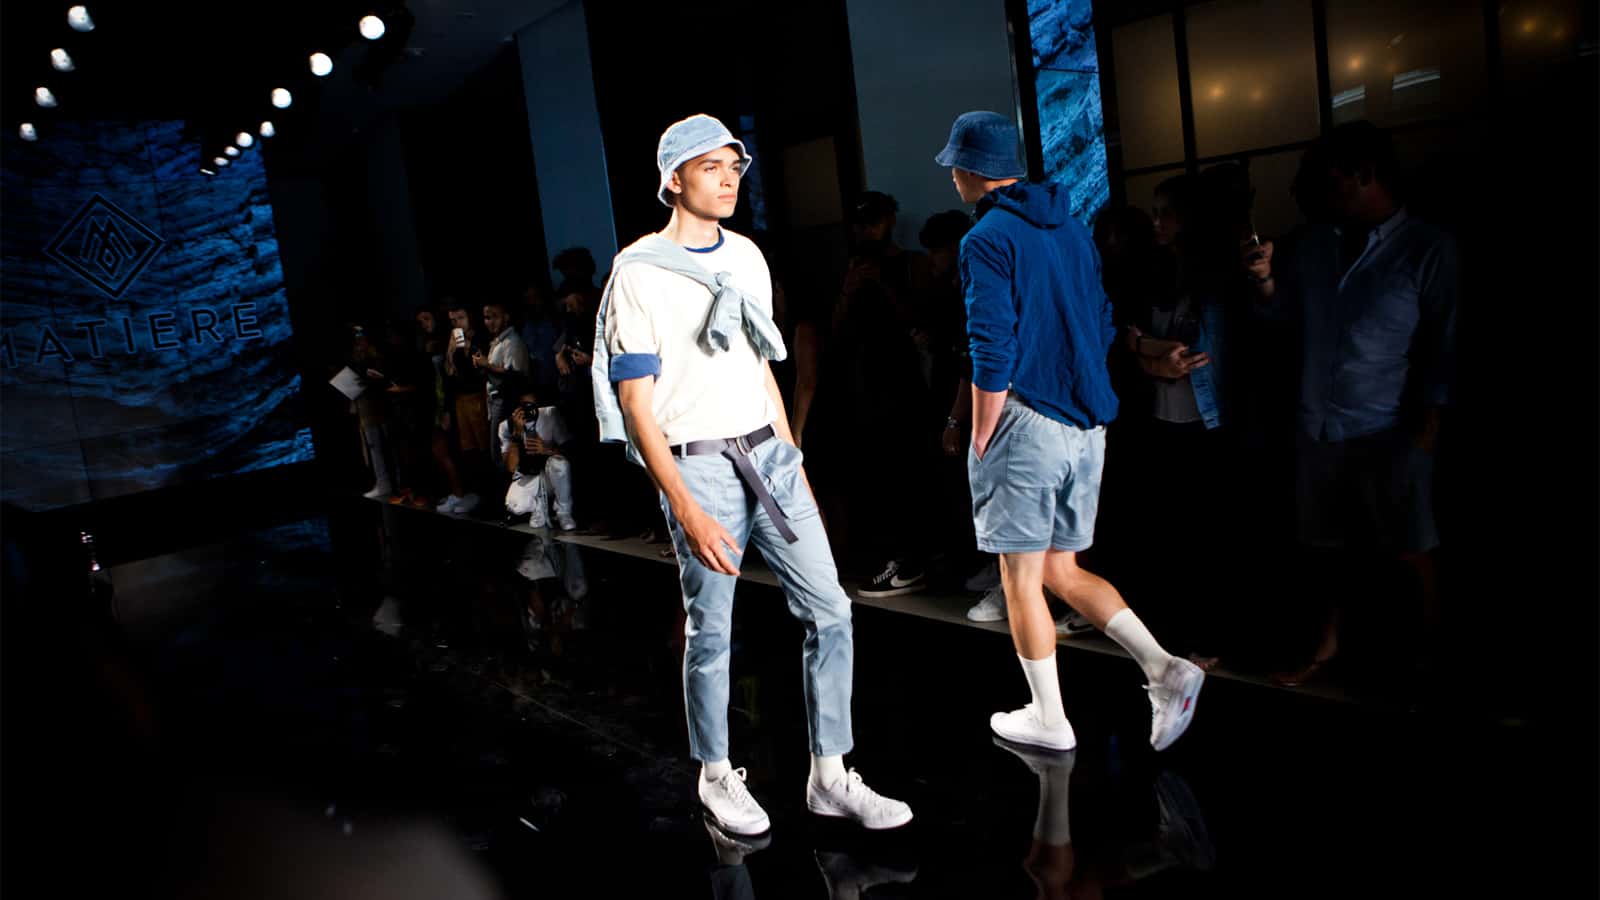 Male model walking in Matiere men's sow at new york men's fashion week featured in how to make your men's style better